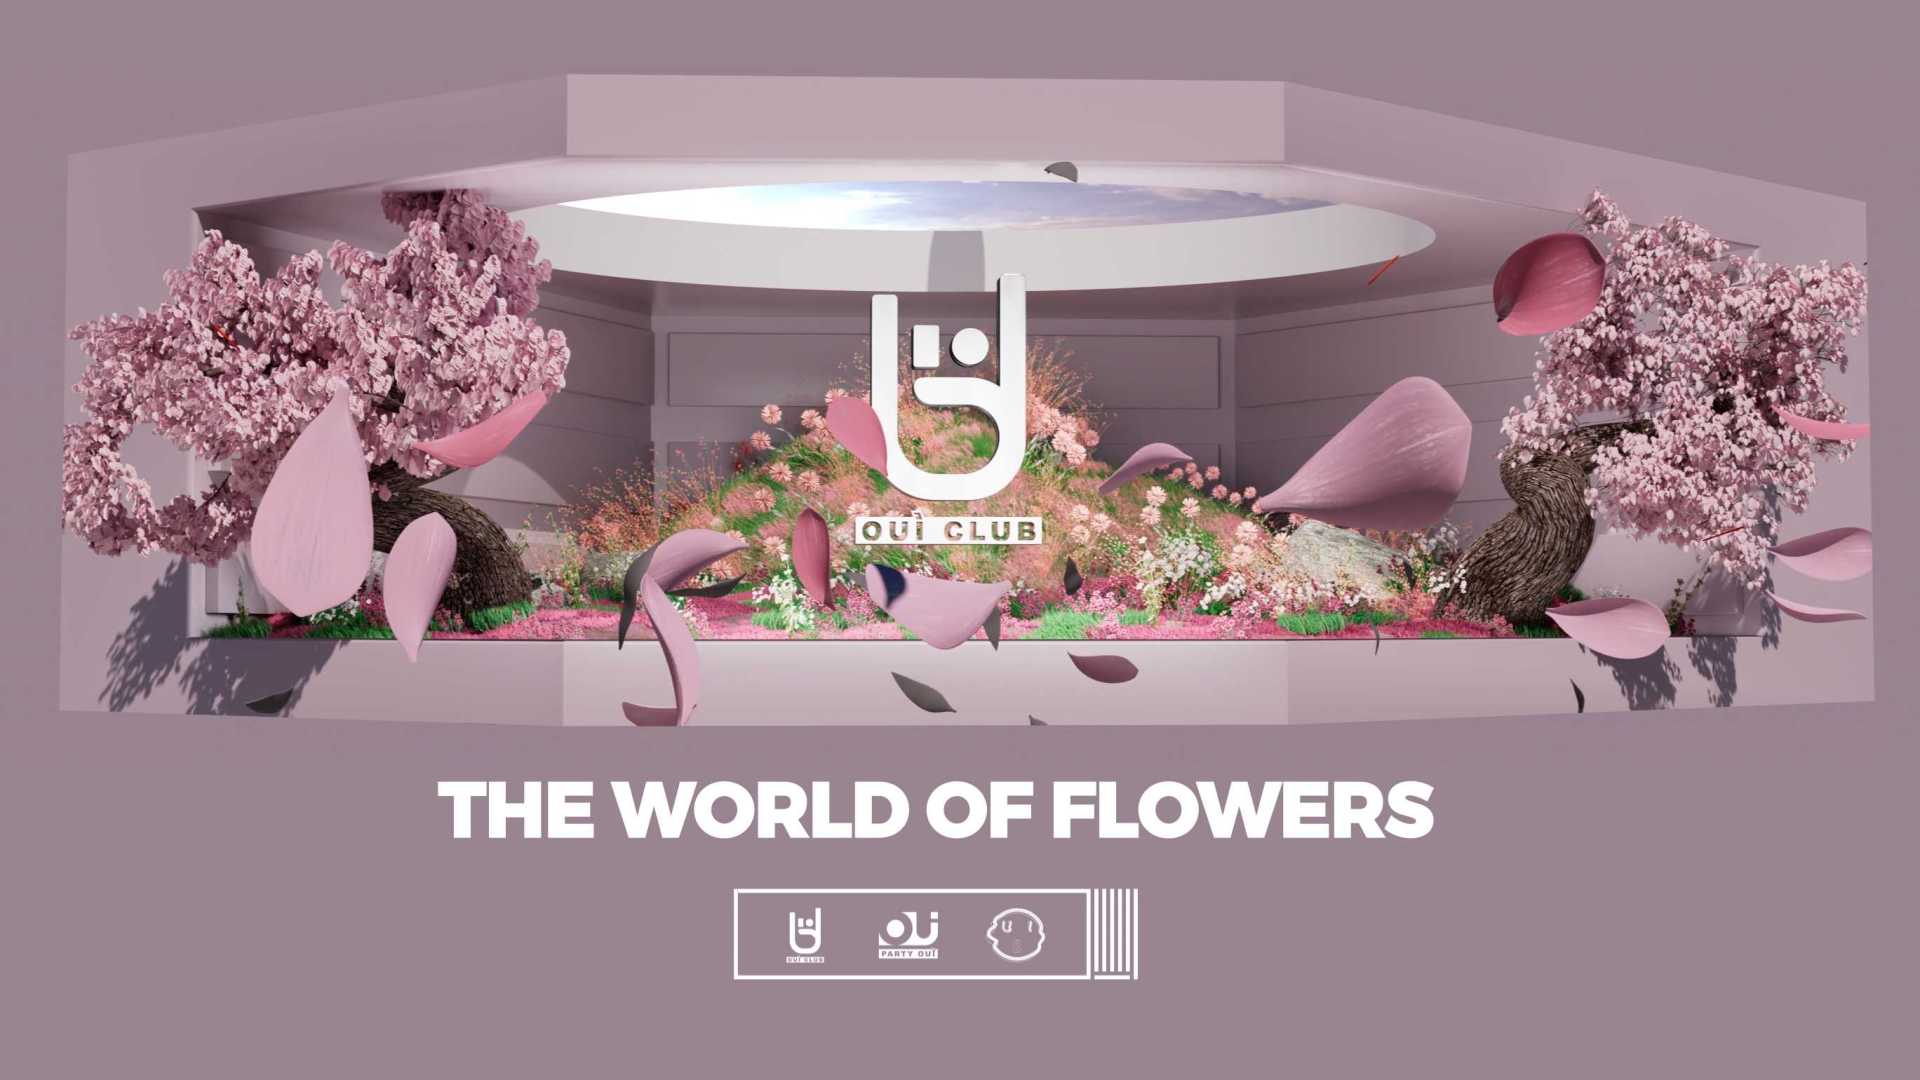 The World of Flowers